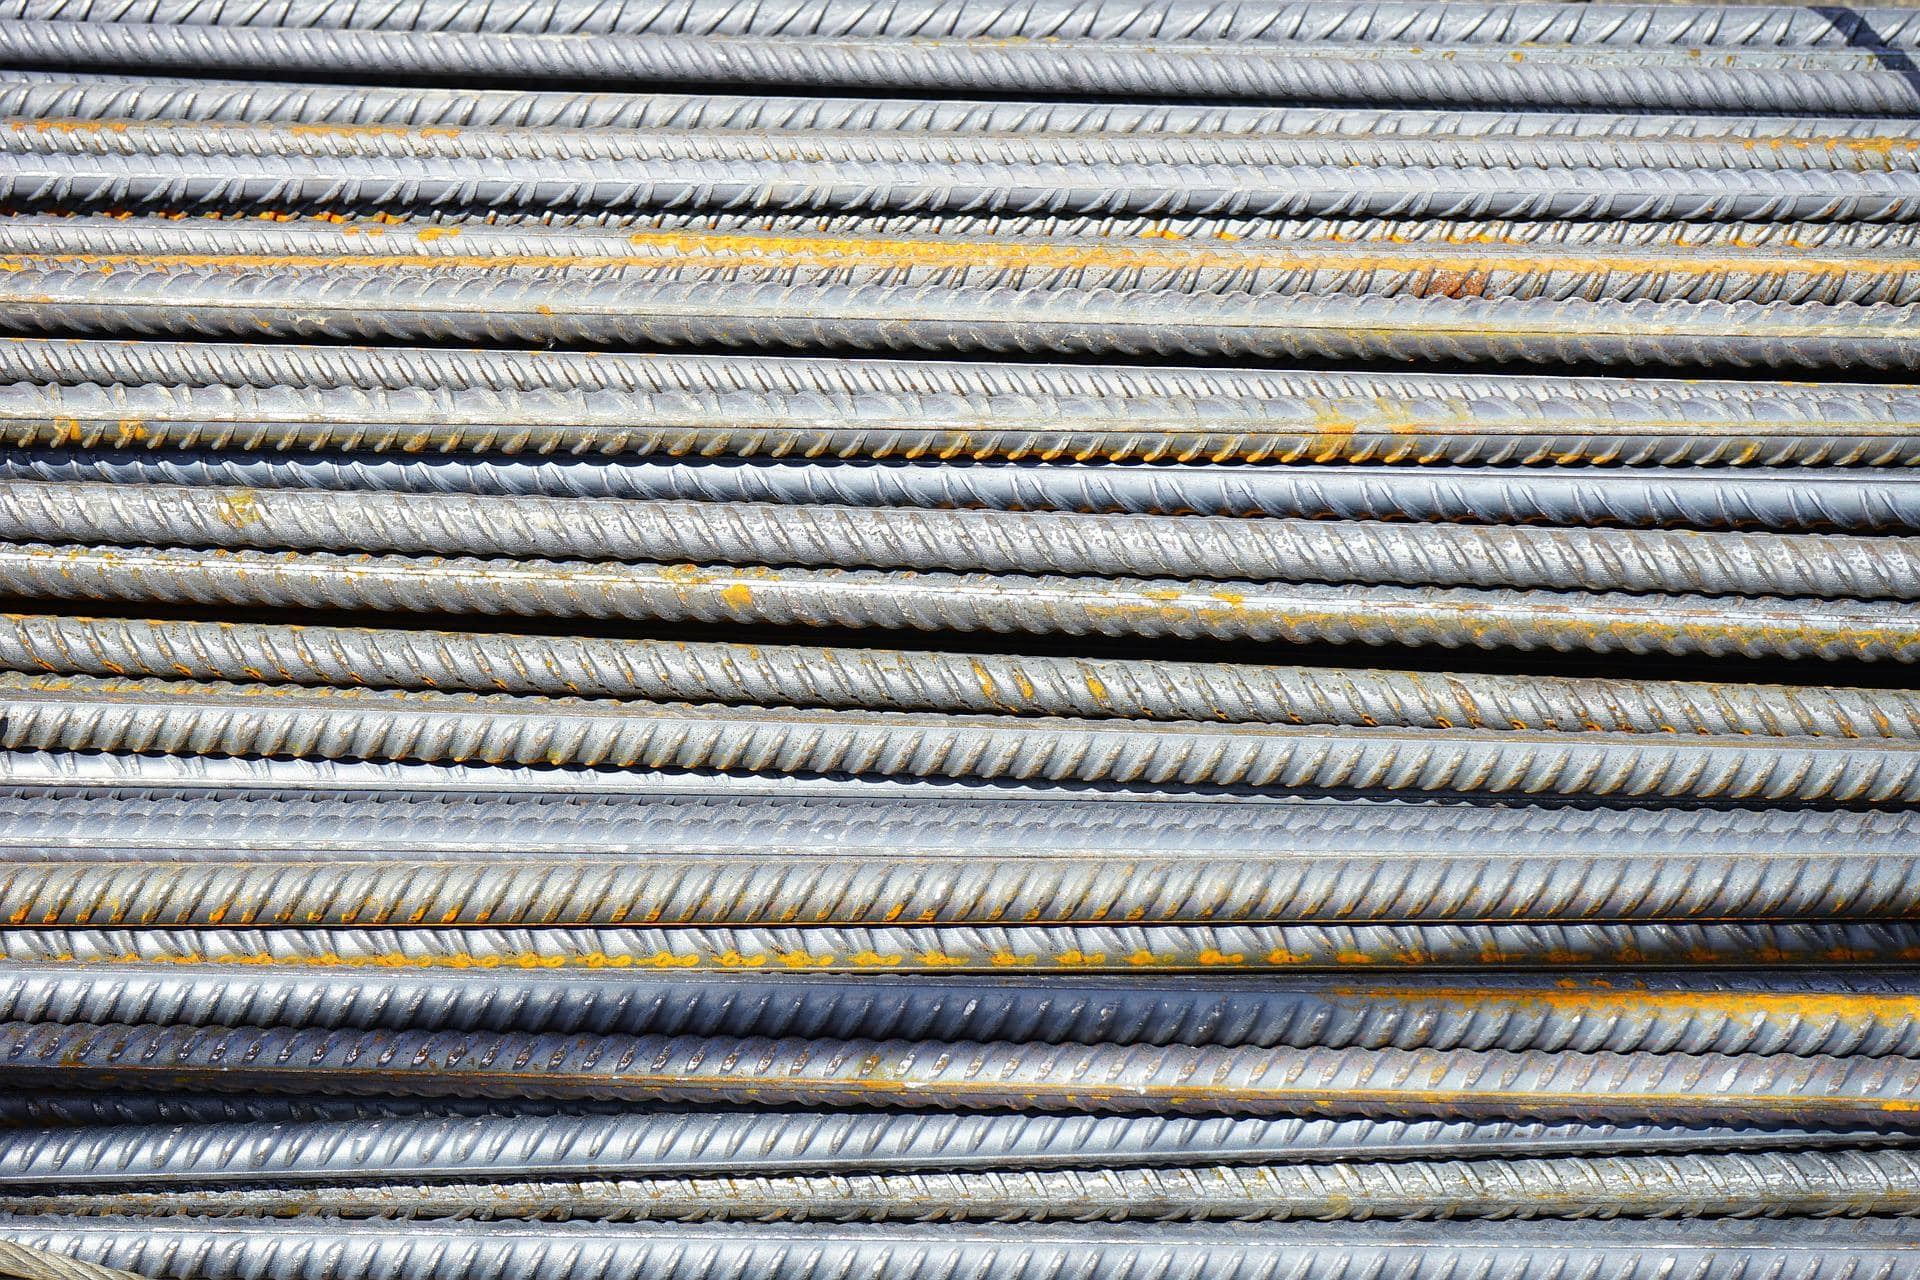 Commercial Metals Company launches new net zero emission rebar